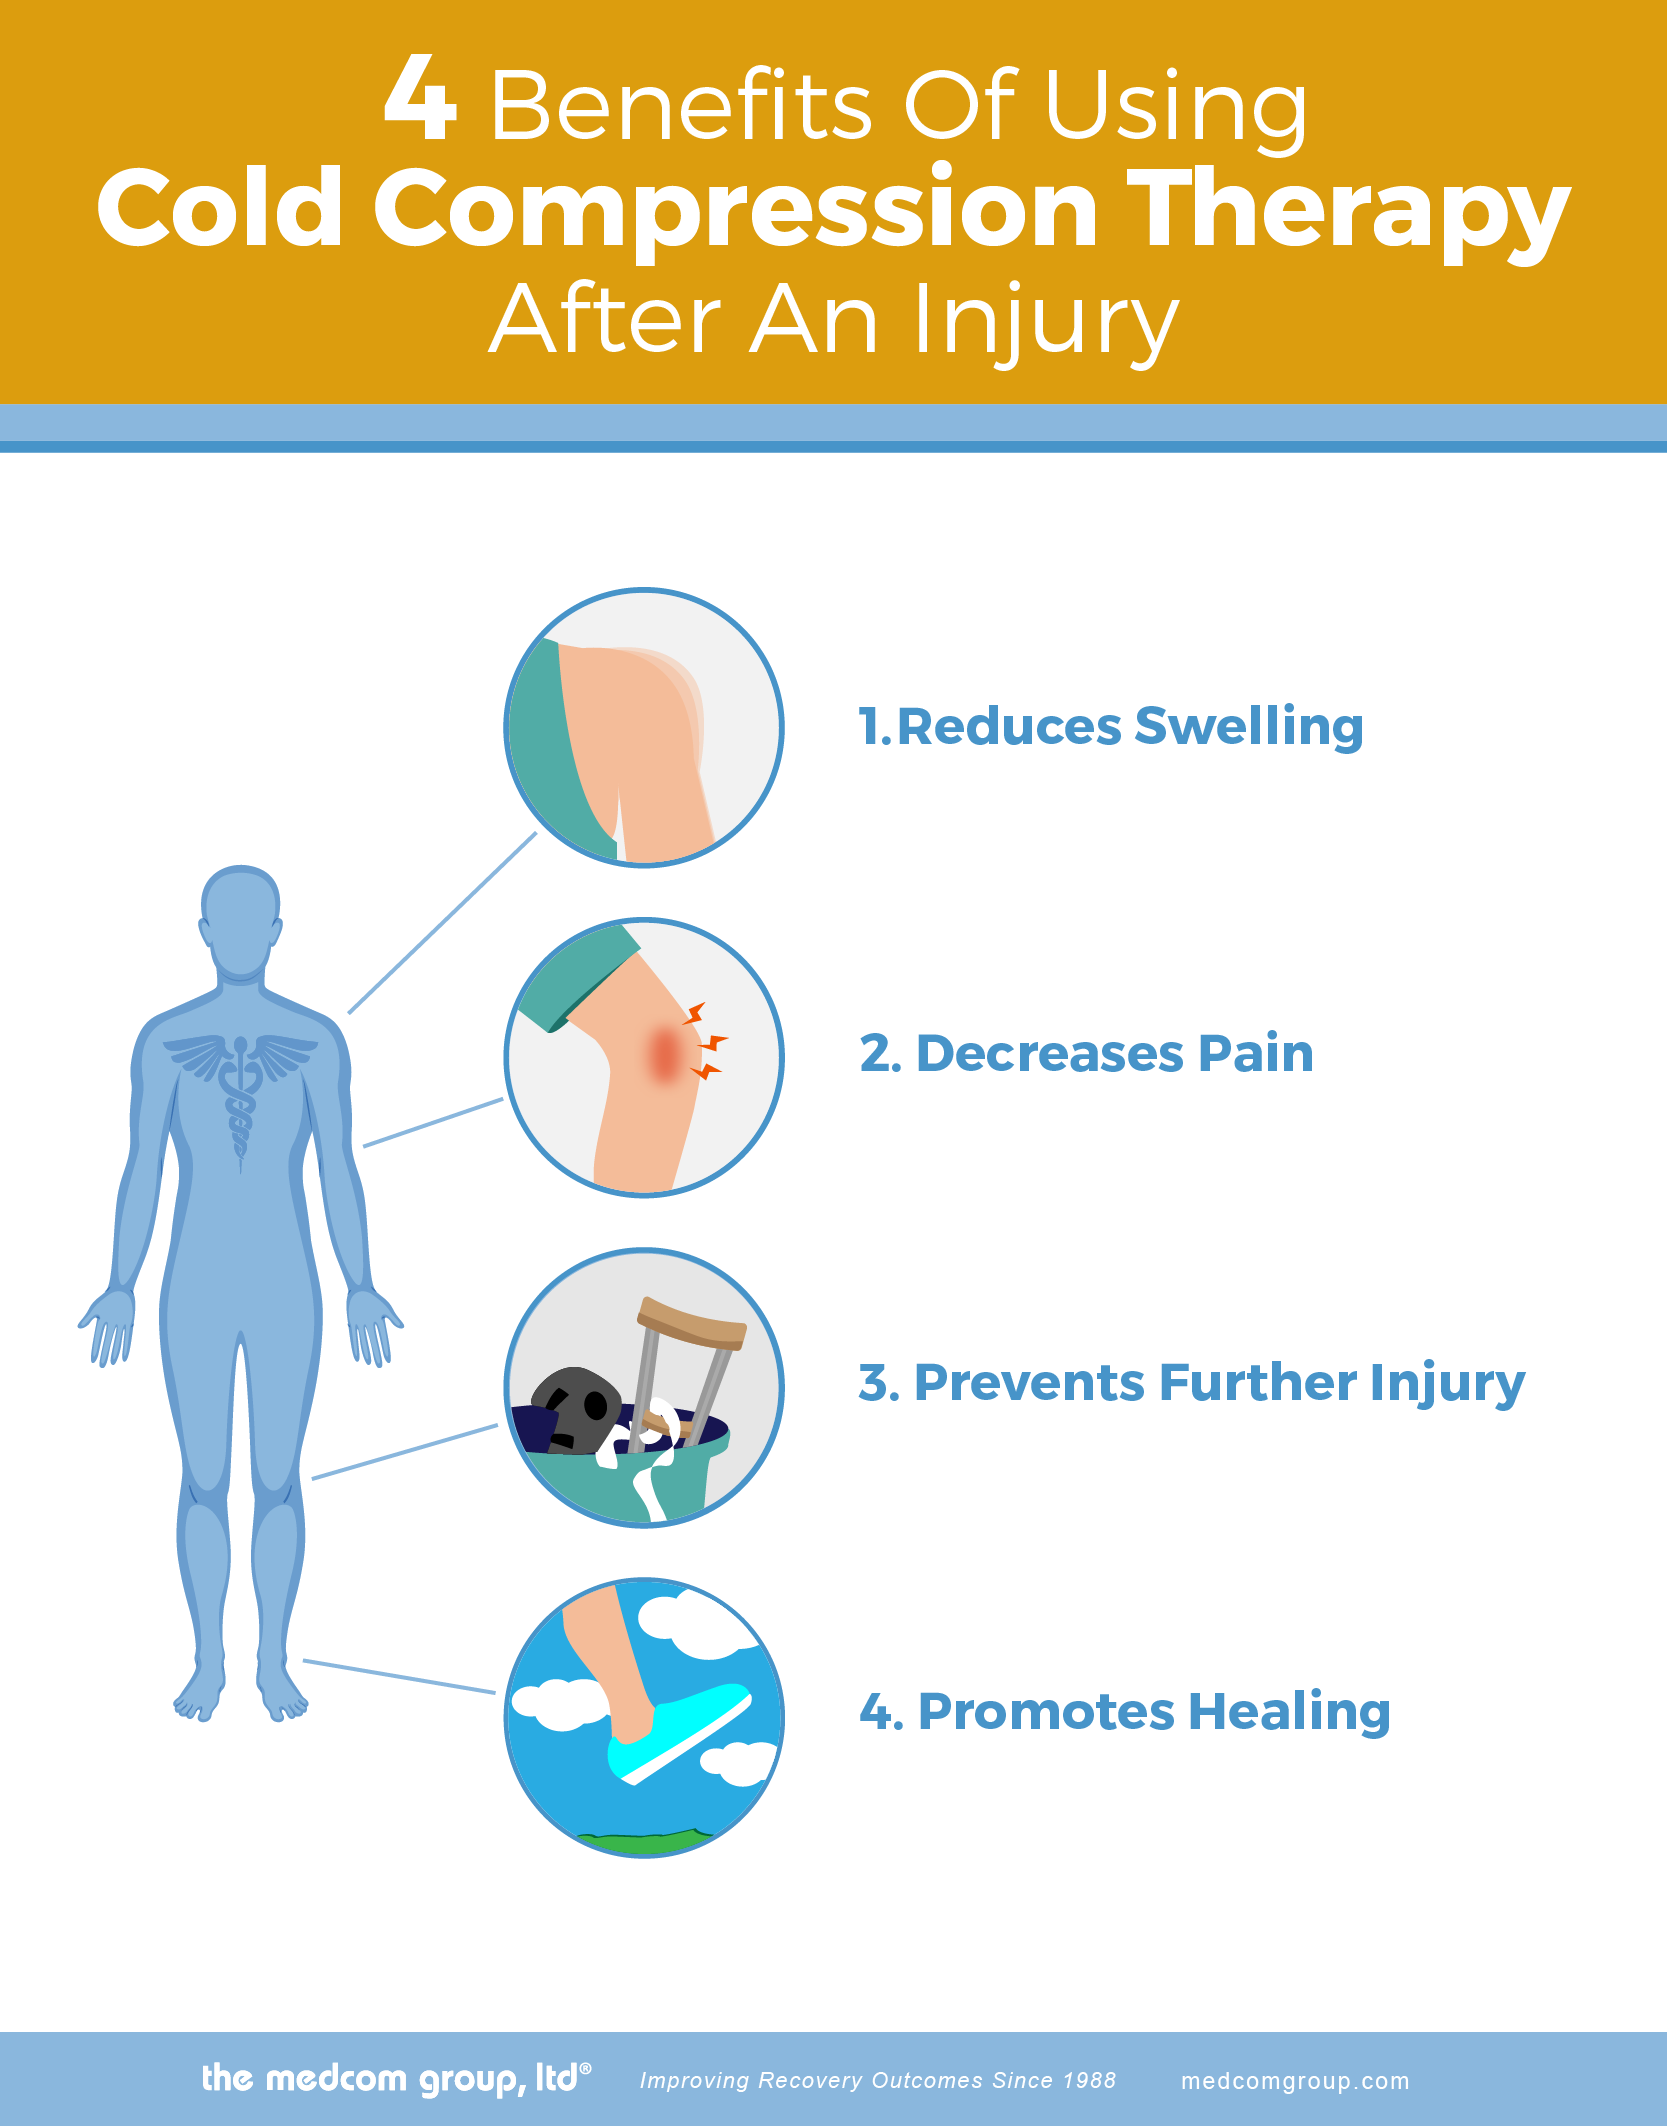 https://www.medcomgroup.com/product_images/uploaded_images/4-benefits-of-using-cold-compression-therapy-after-an-injury.png